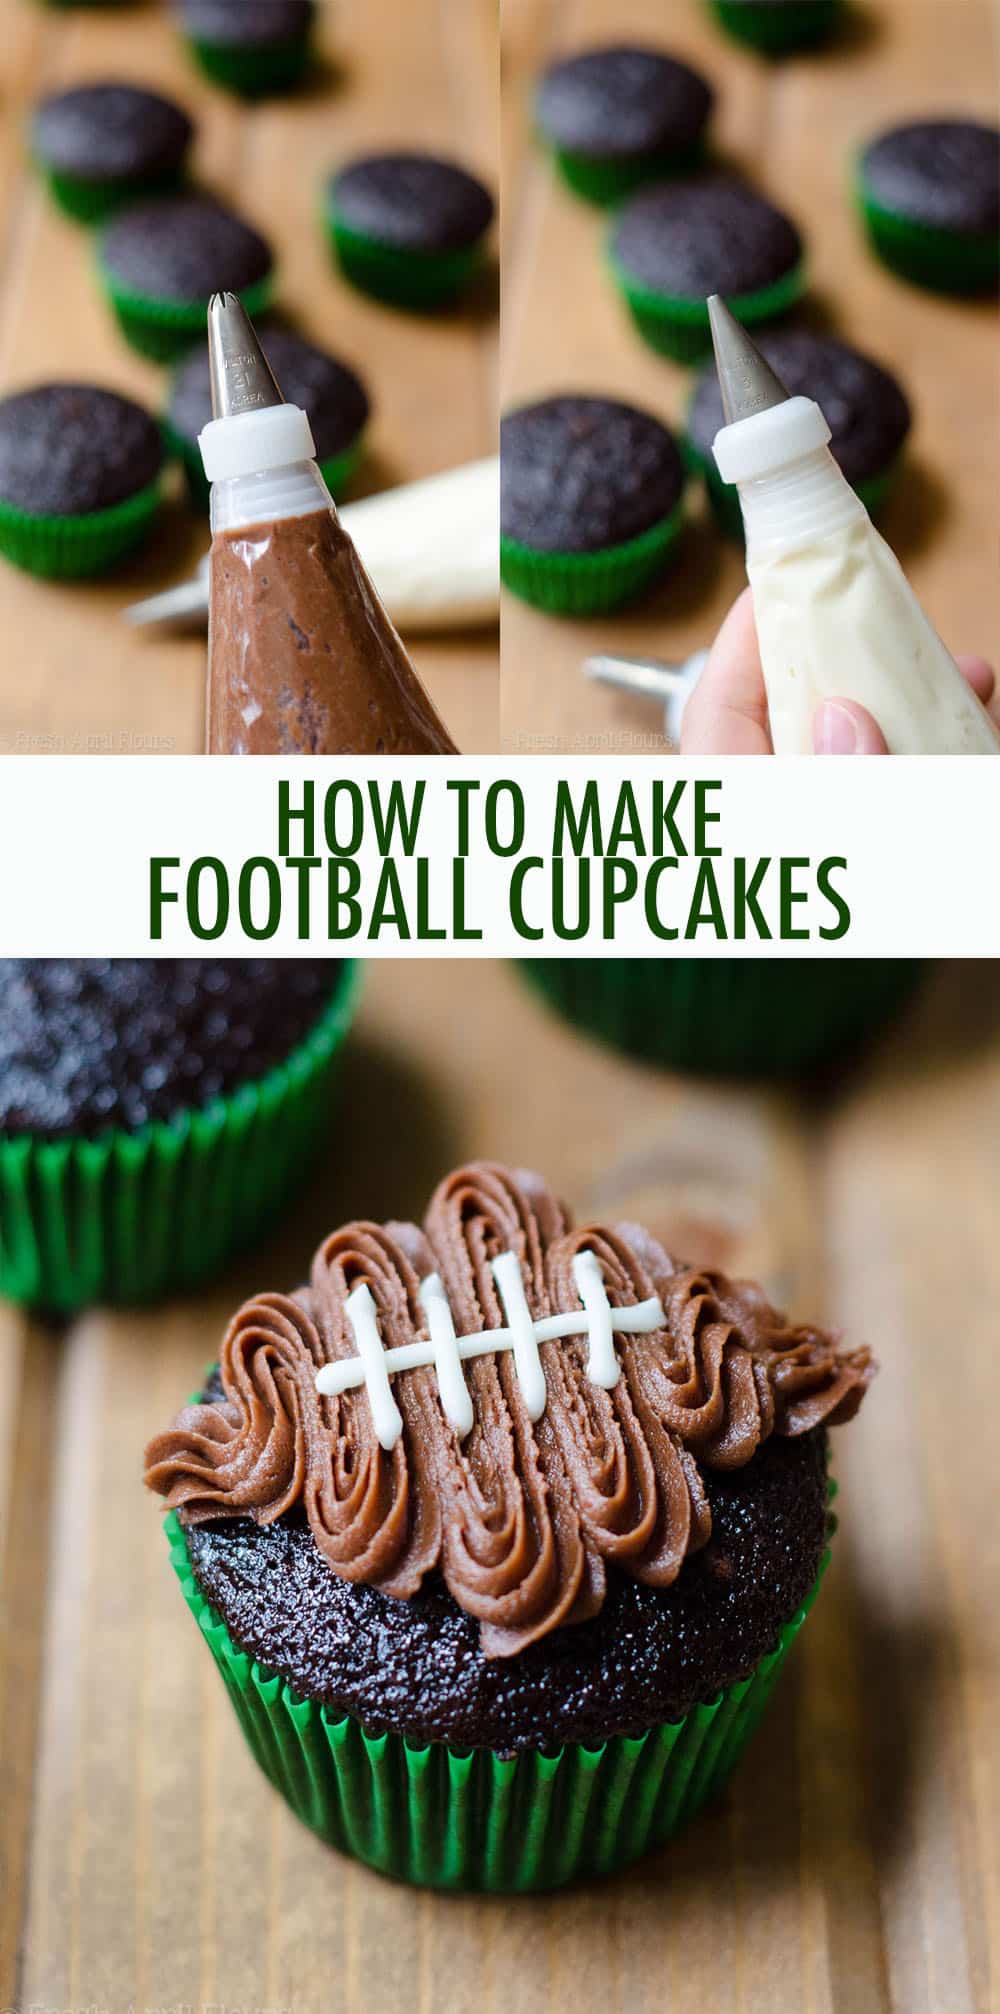 Turn any batch of cupcakes into adorable football cupcakes with this easy tutorial and video. It's a touchdown every time! via @frshaprilflours